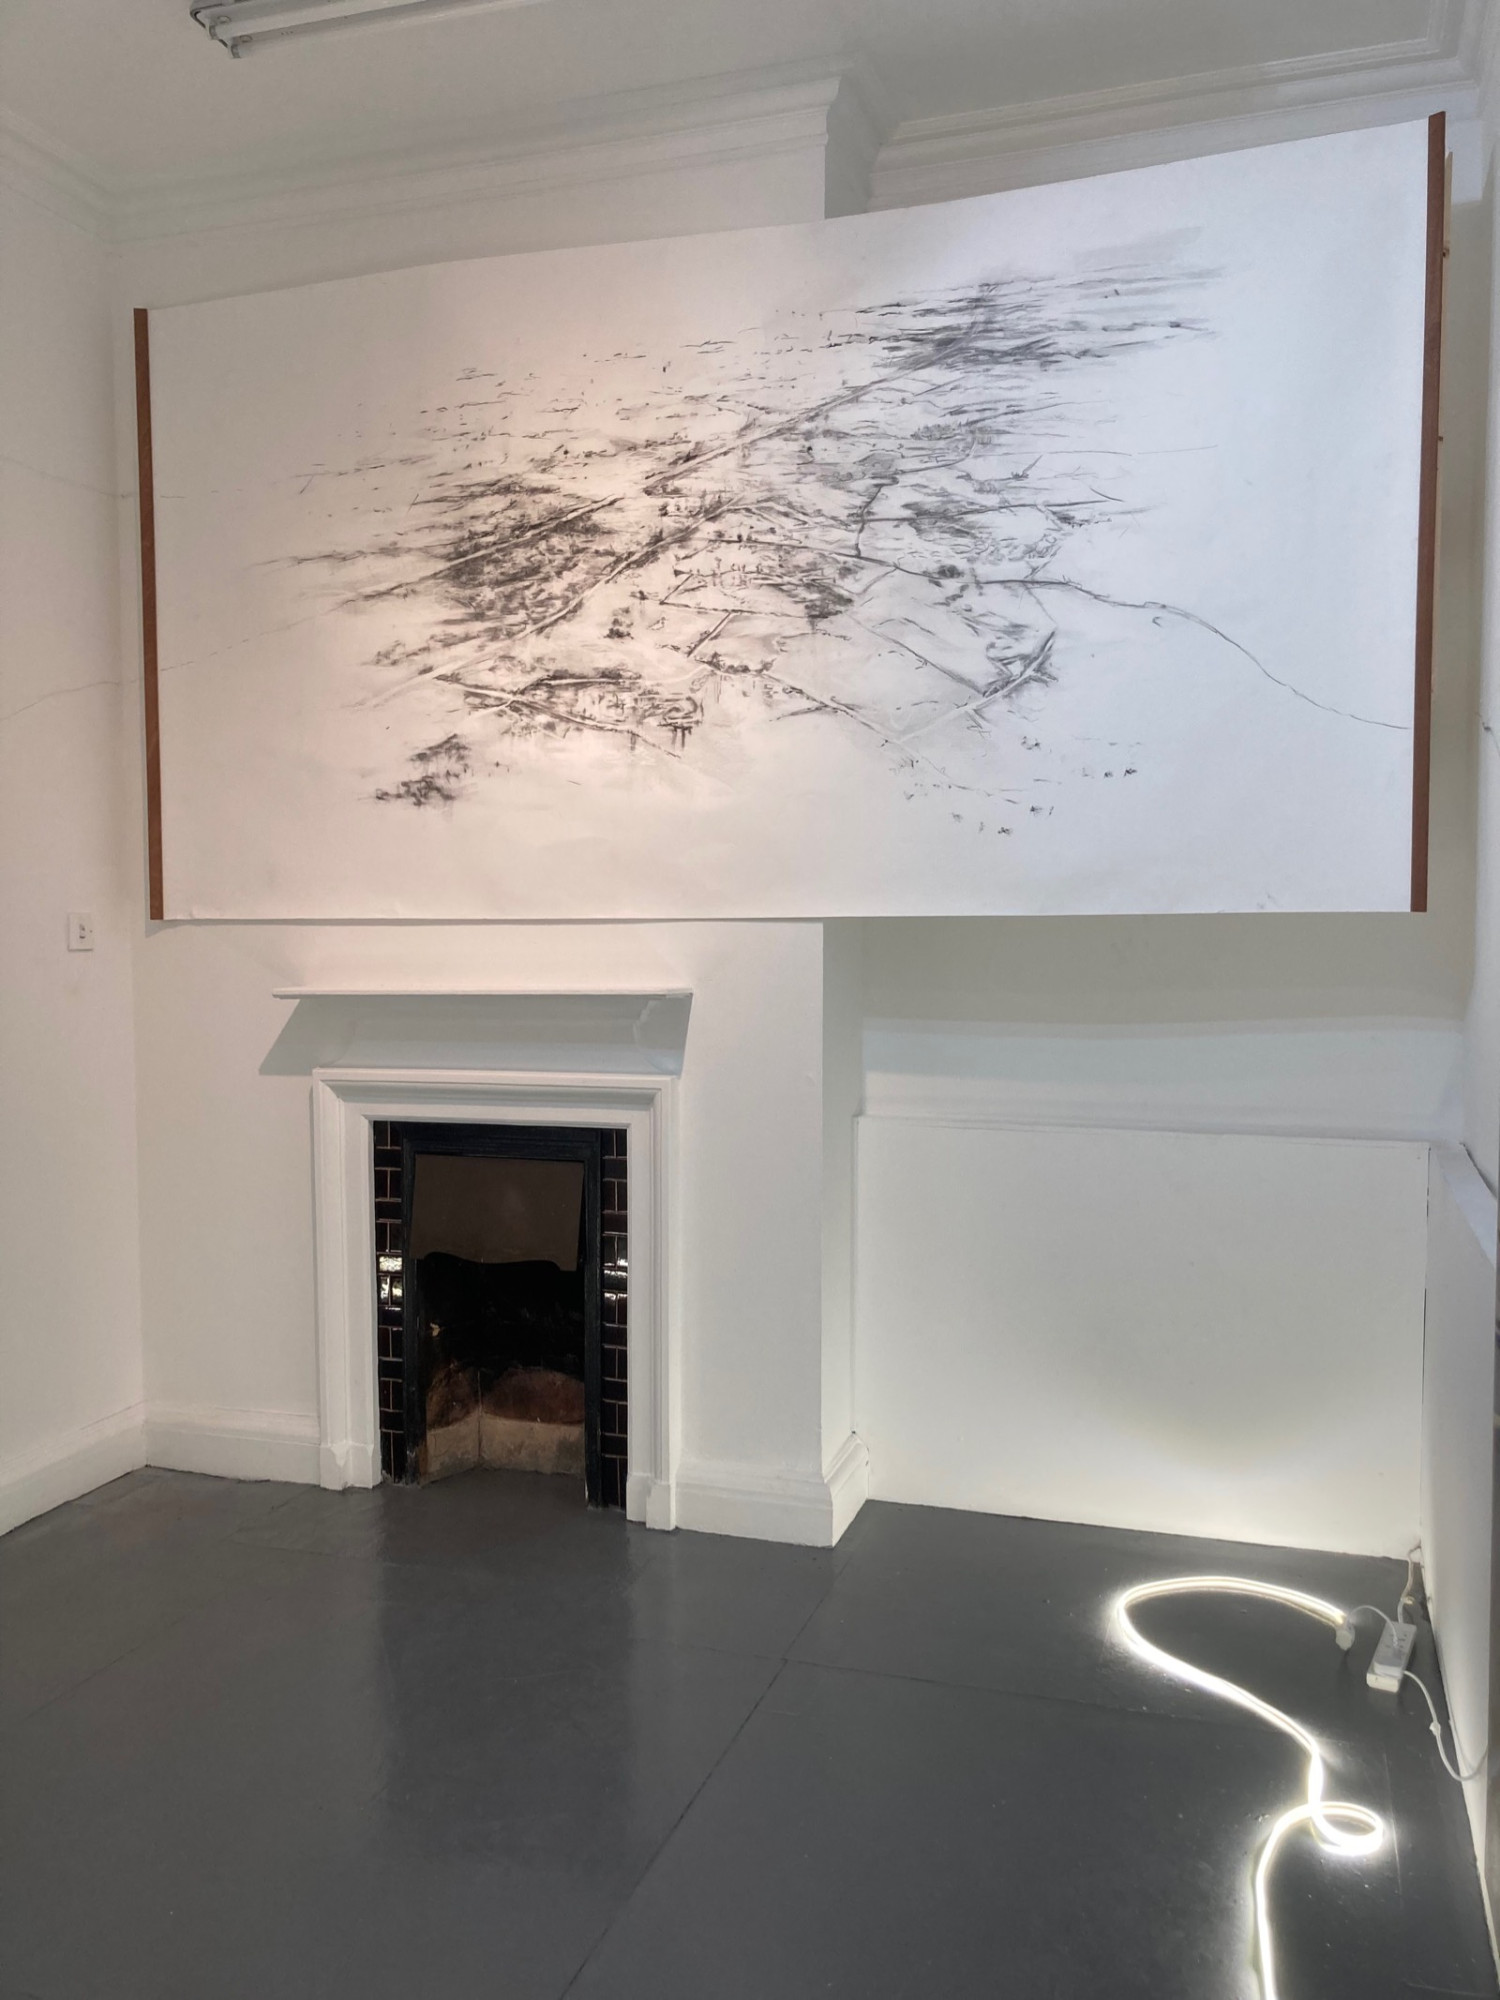 Charcoal and graphite on paper. NCAD Works 2023 exhibition, installation view. The Annex, 101 St James Street